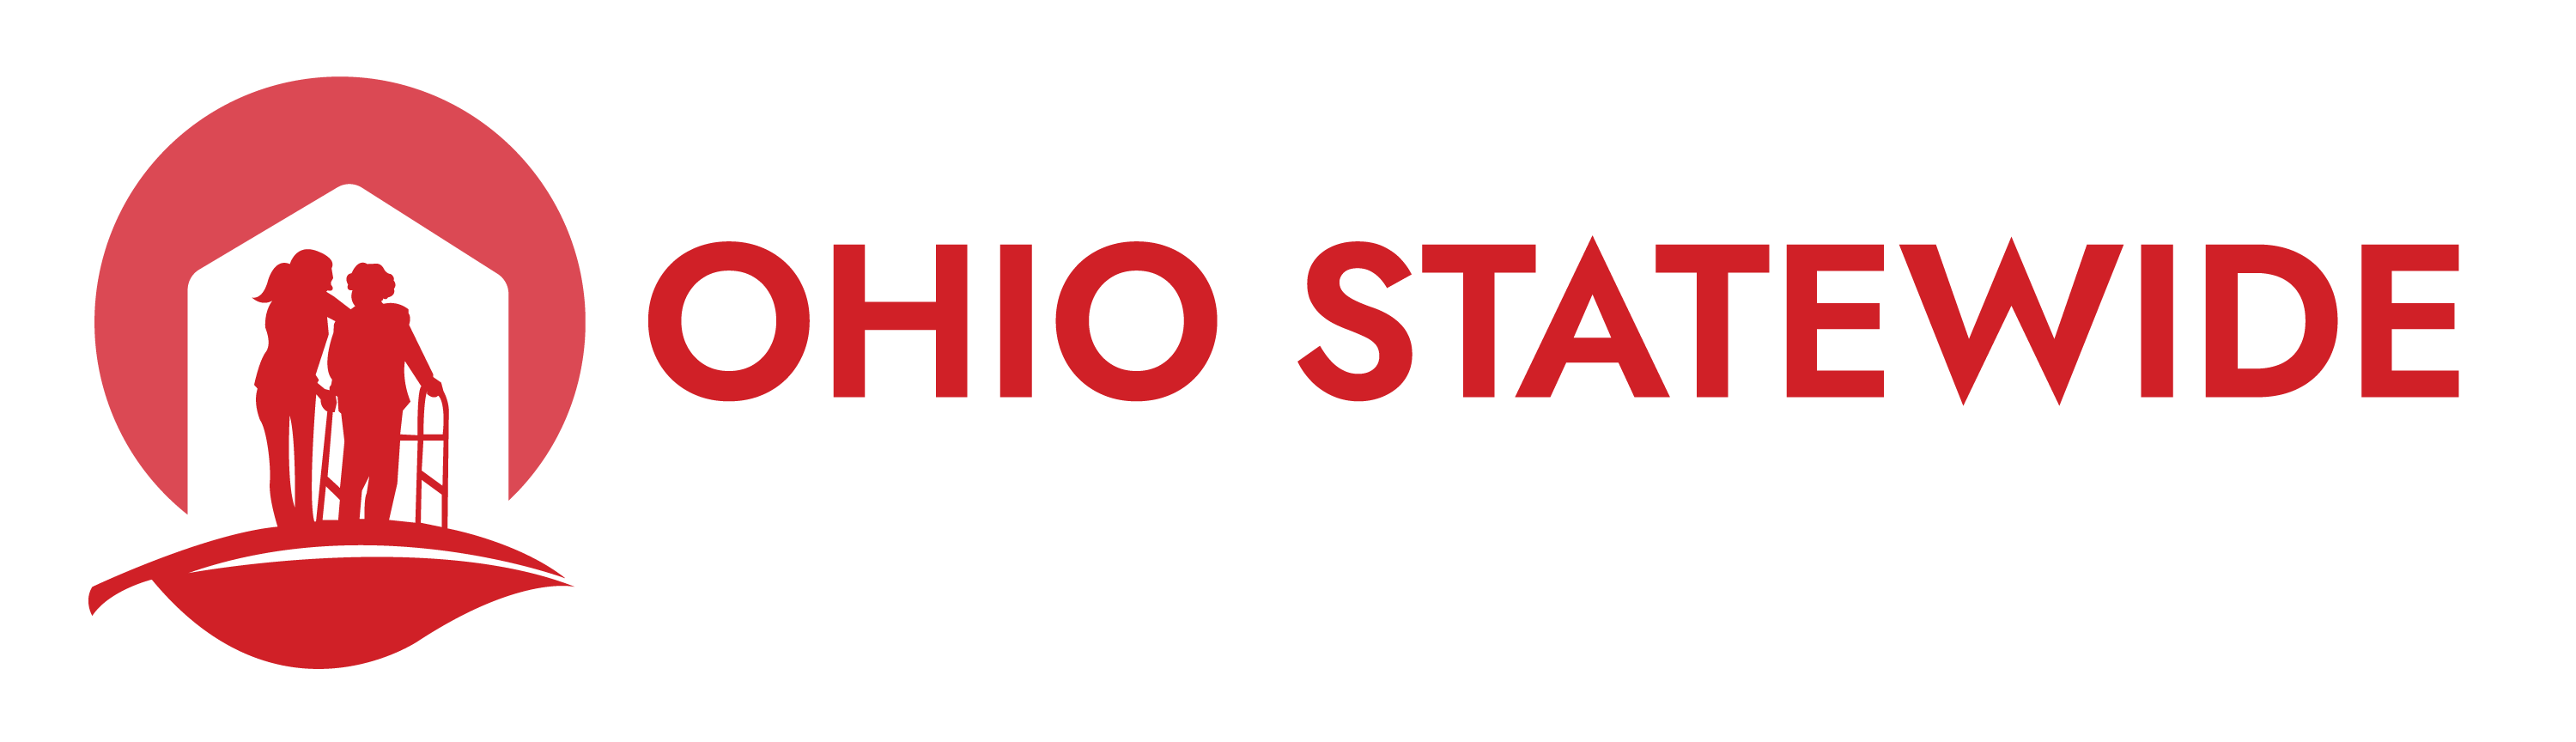 Be the Helping Hand Seniors Need! – OHIO STATEWIDE OLDER ADULT ADVISORS